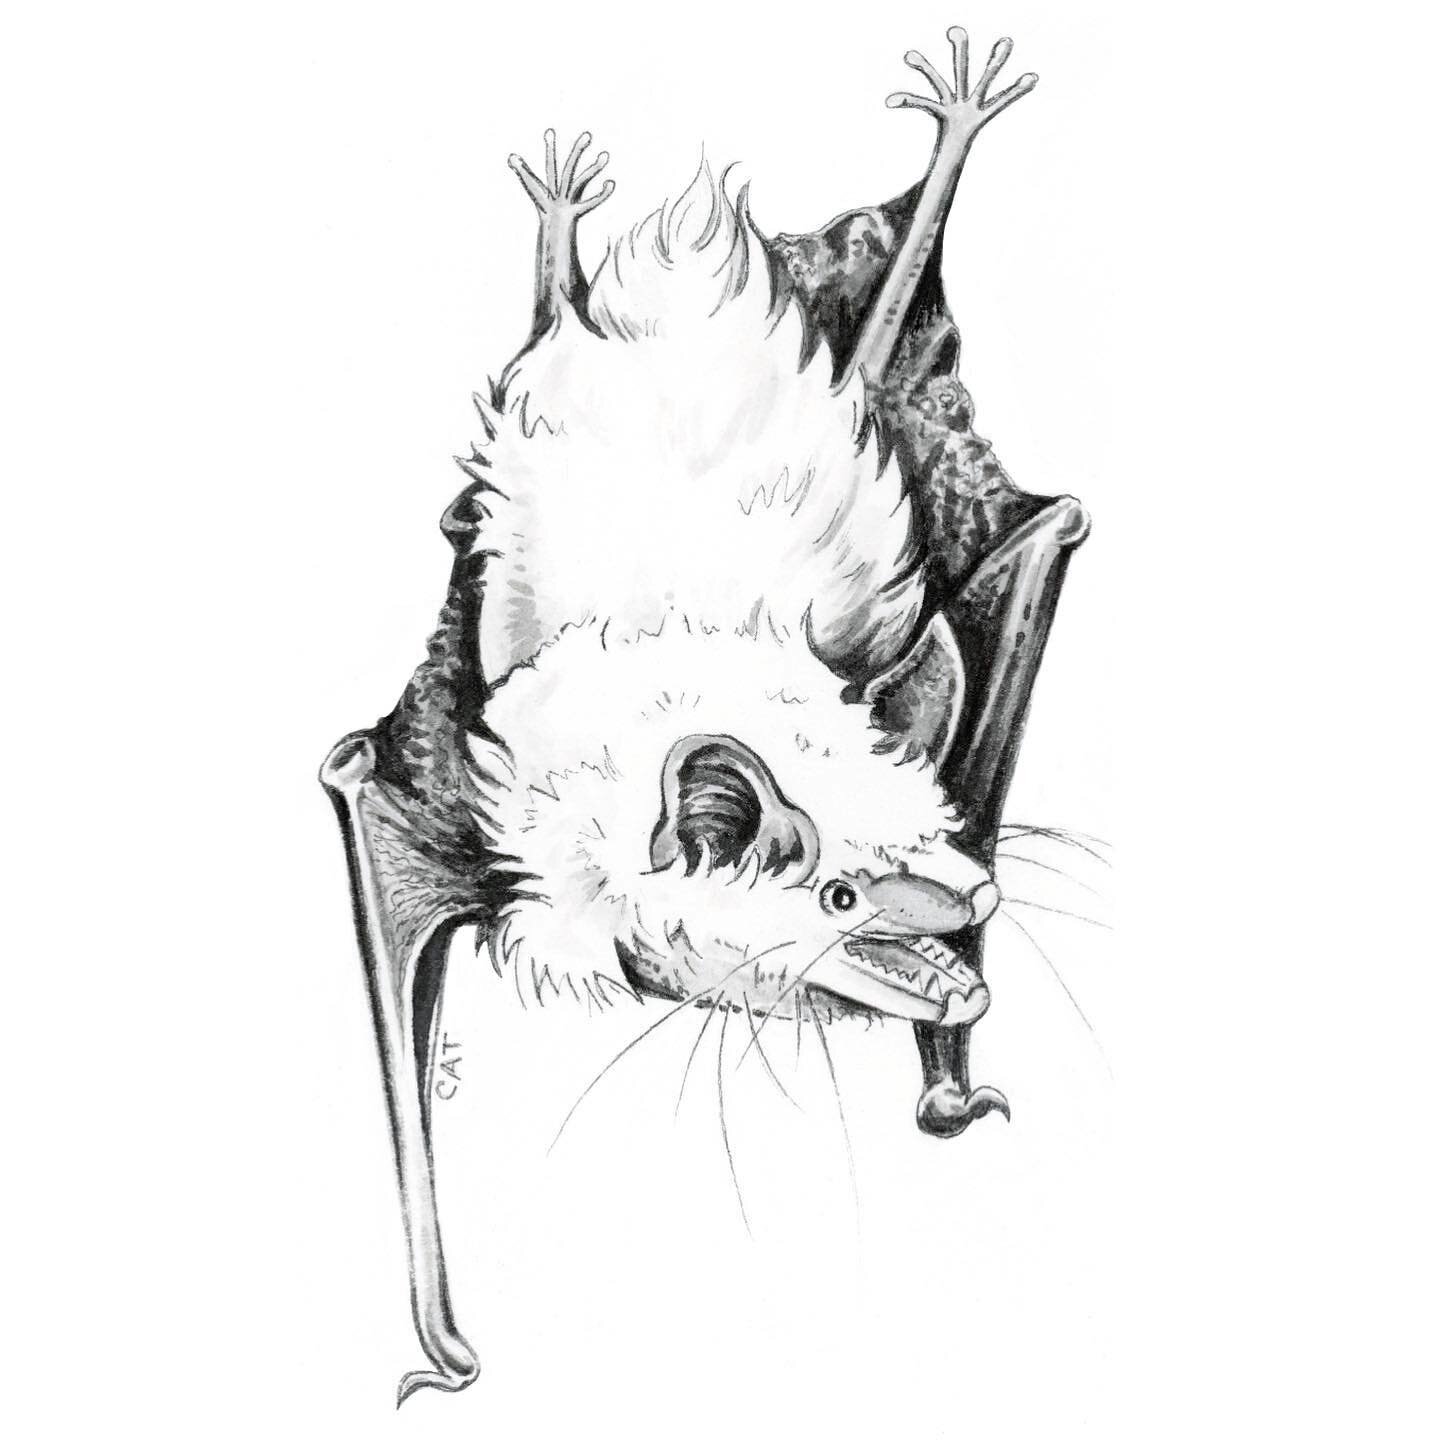 Commission slots are getting filled 🗓✅ Ready to secure your slot? Send an DM or Email my way.
::
Big Brown Bat, 5x7inches (ink on paper)